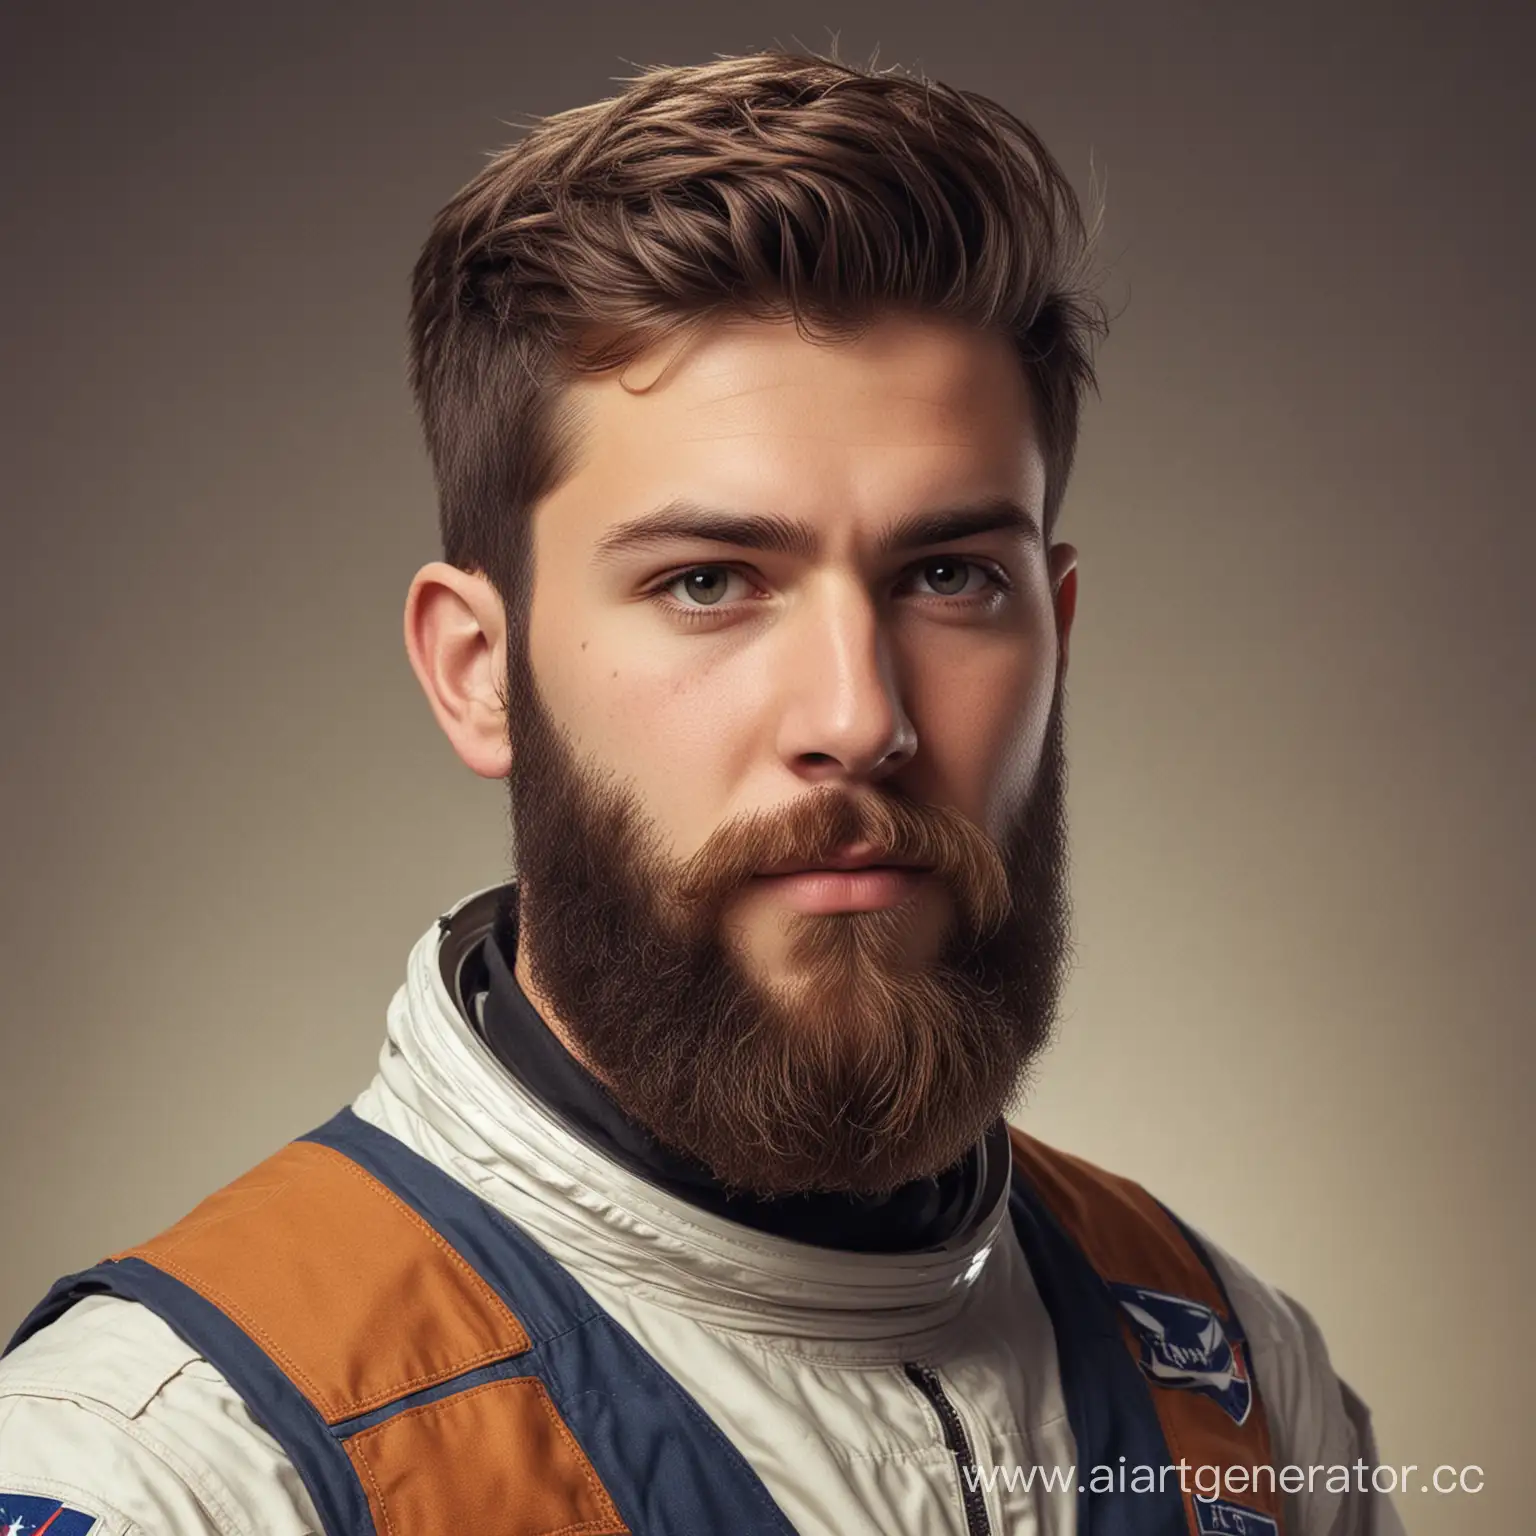 Renowned-Space-Traveler-Clothing-Designer-25YearOld-Man-with-Neat-Beard-and-Short-Haircut